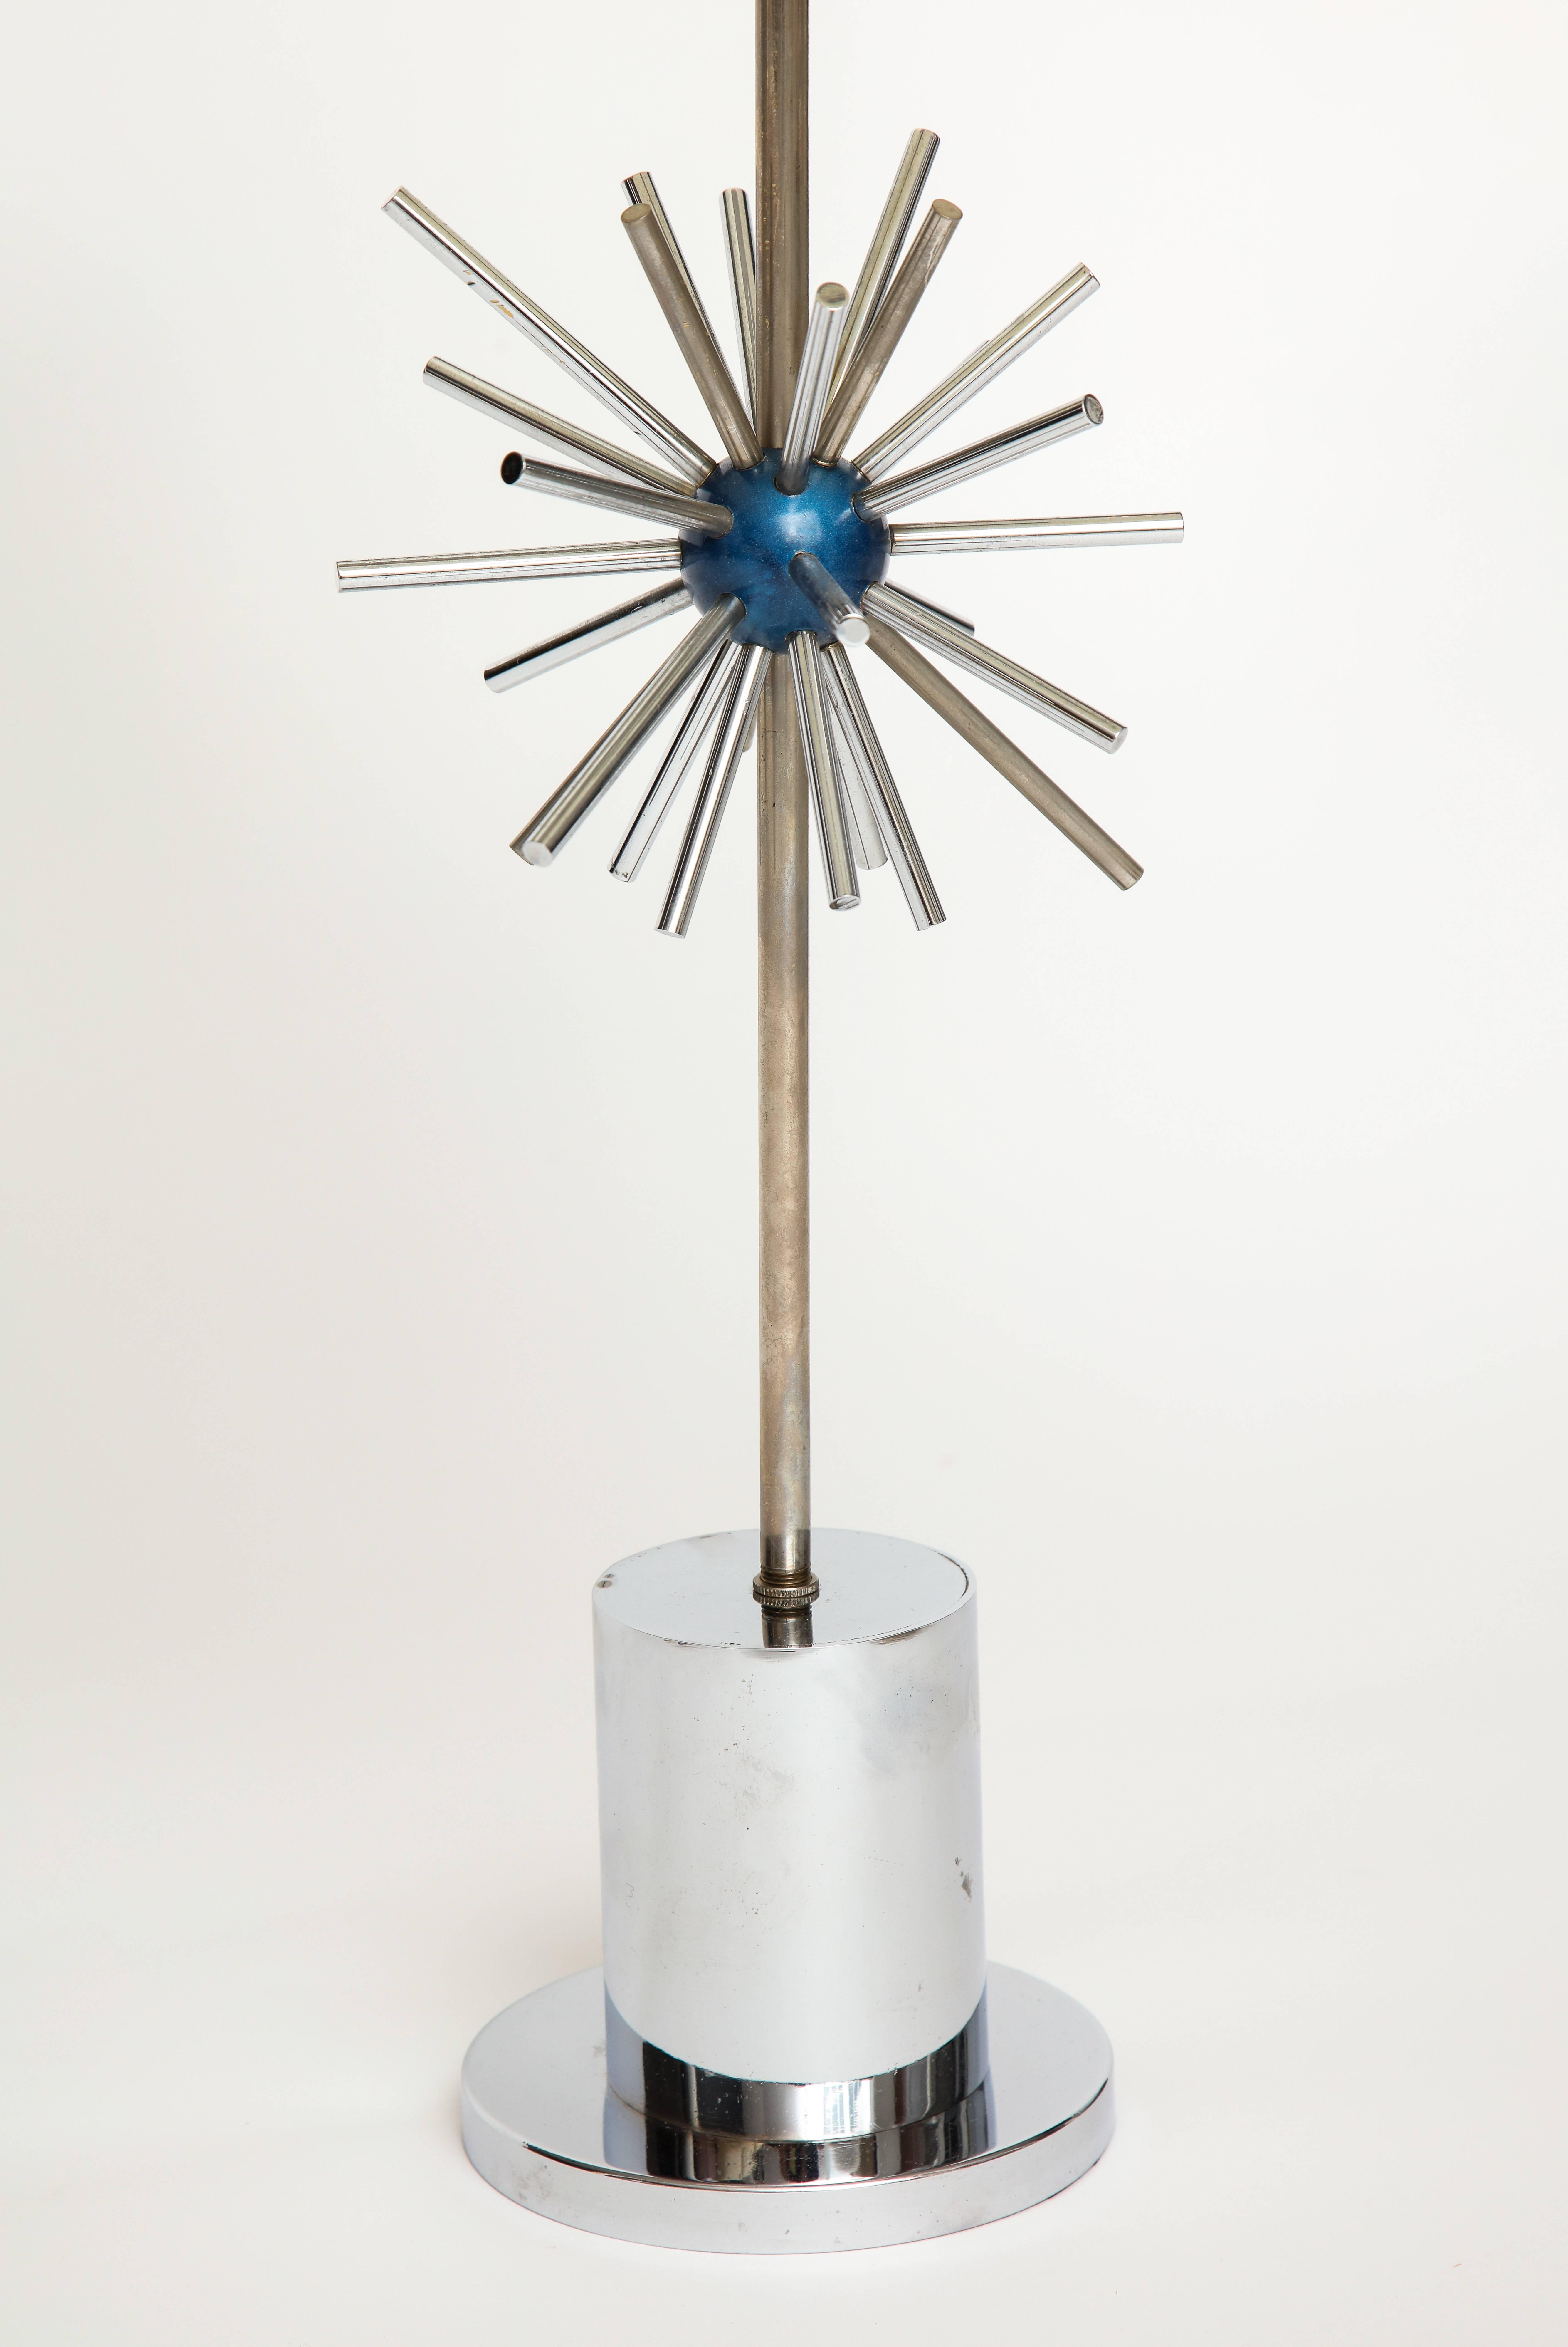 Chrome desk lamp with lacquered blue Sputnik design, French, 1970s.

Beautiful desk lamp in lovely condition. Original design.